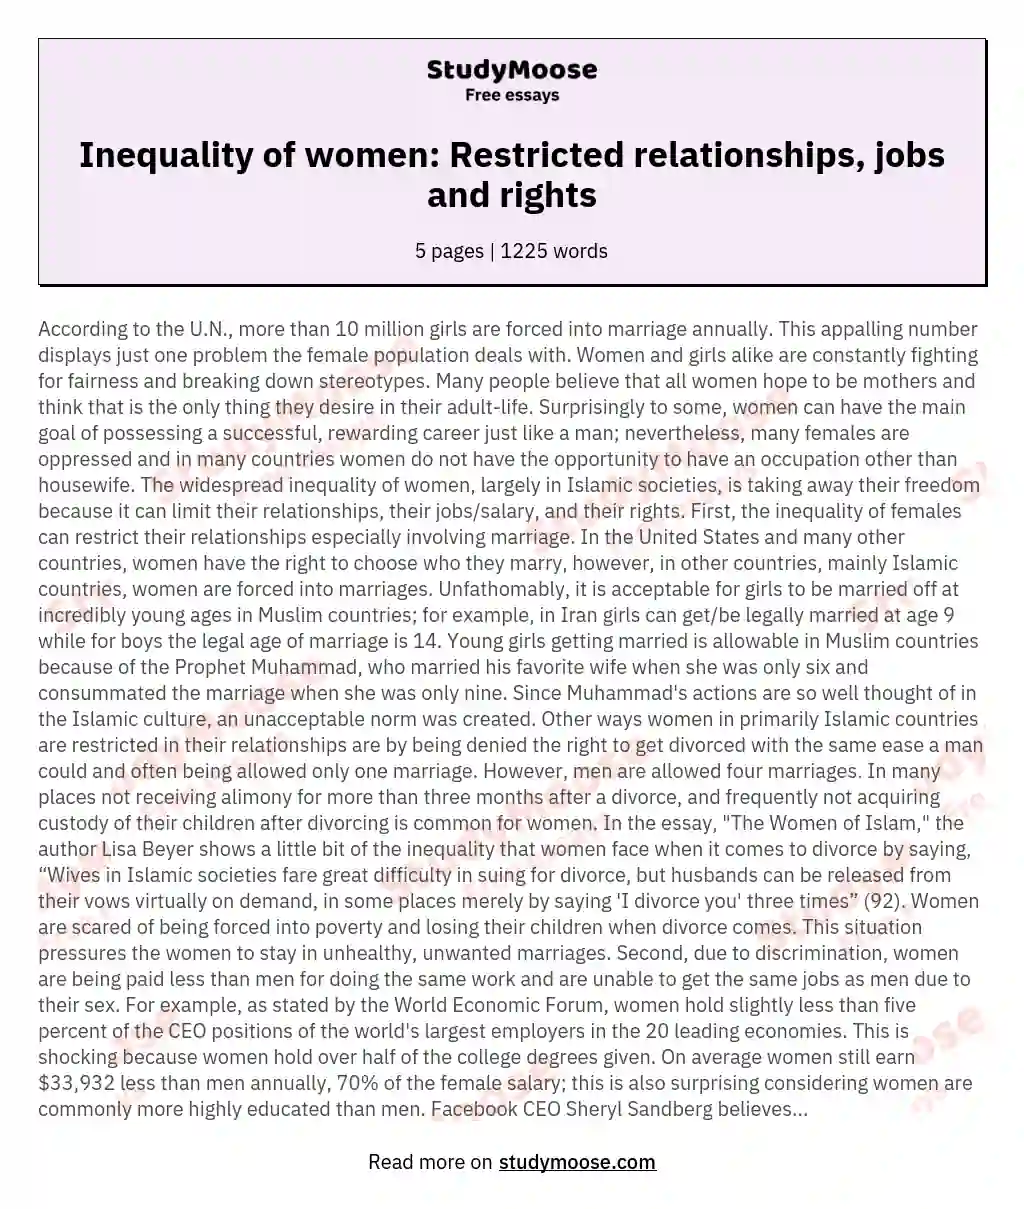 The Inequality of Women in Our World: The Restriction of Their Relationships, Their Job Opportunities, and Their Rights